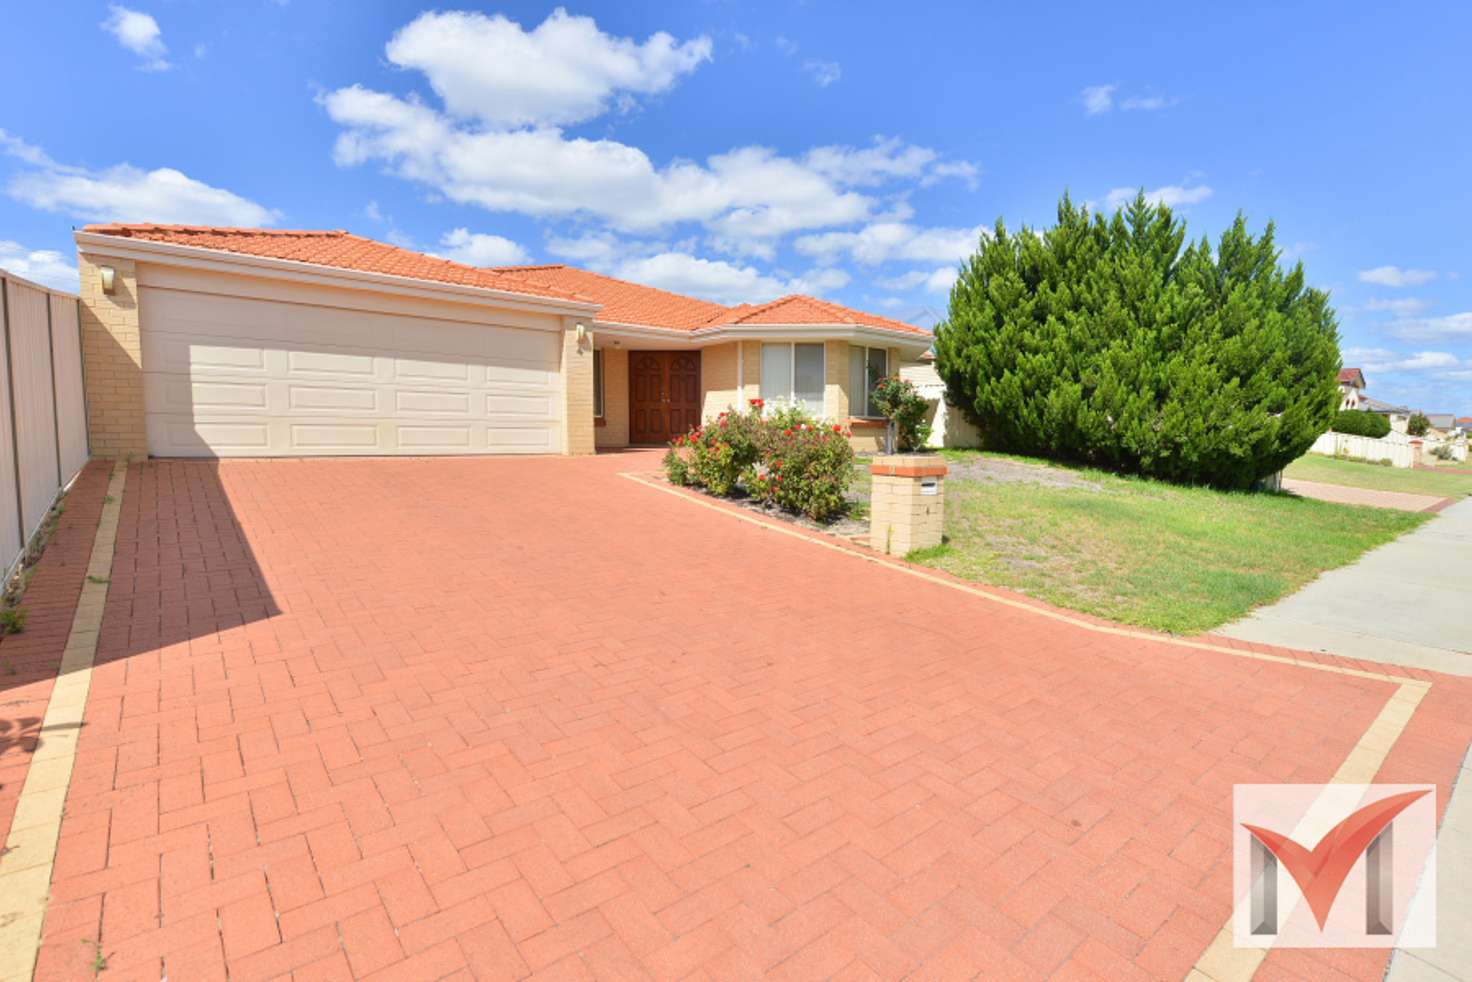 Main view of Homely house listing, 4 Laguna Wy, Canning Vale WA 6155